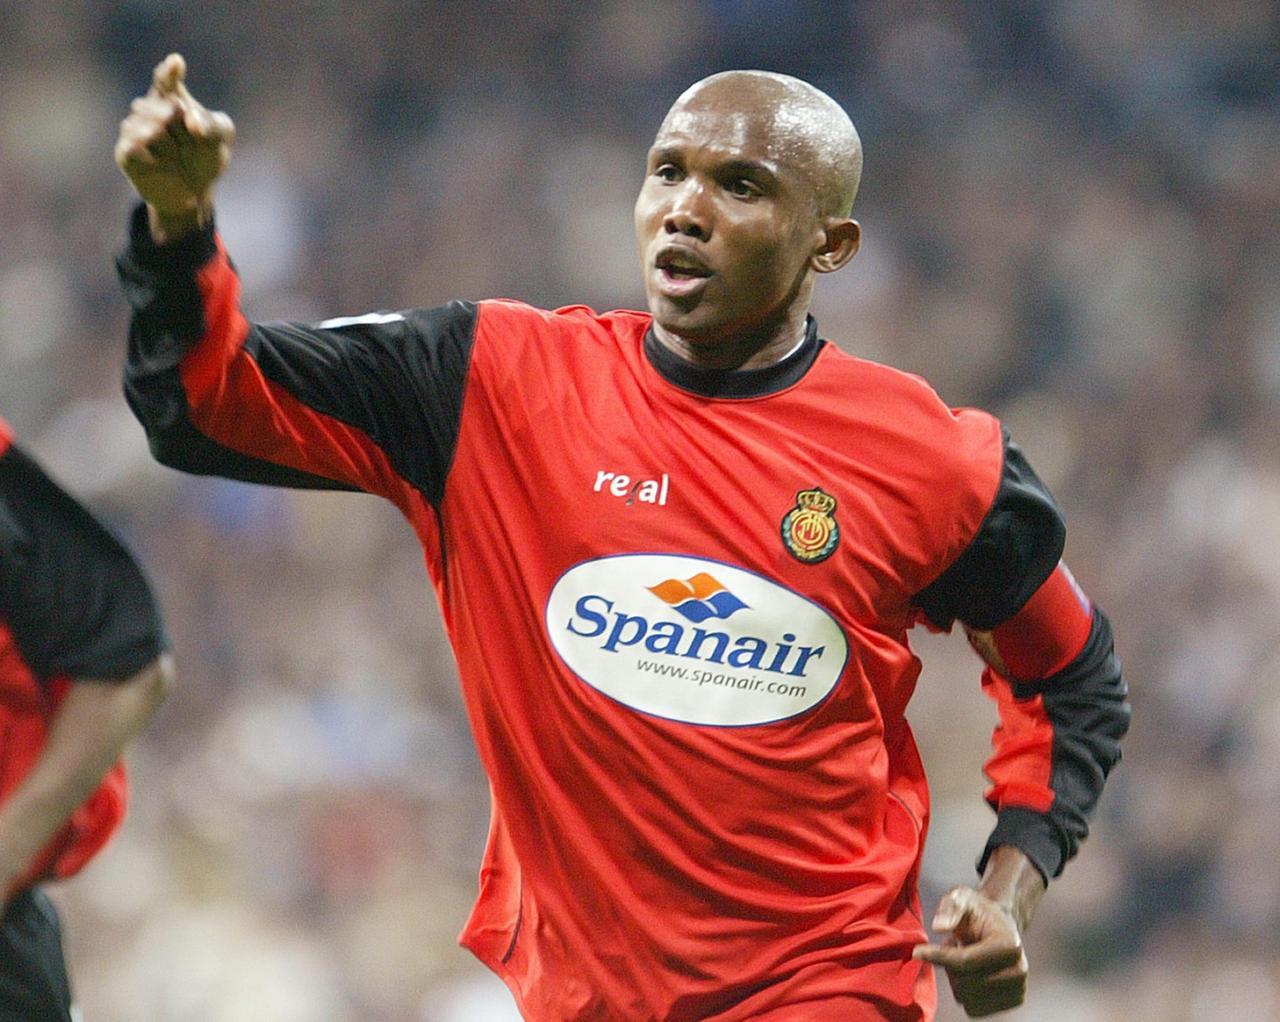 Eto’o And The Tradition of World-Class Strikers At RCD Mallorca